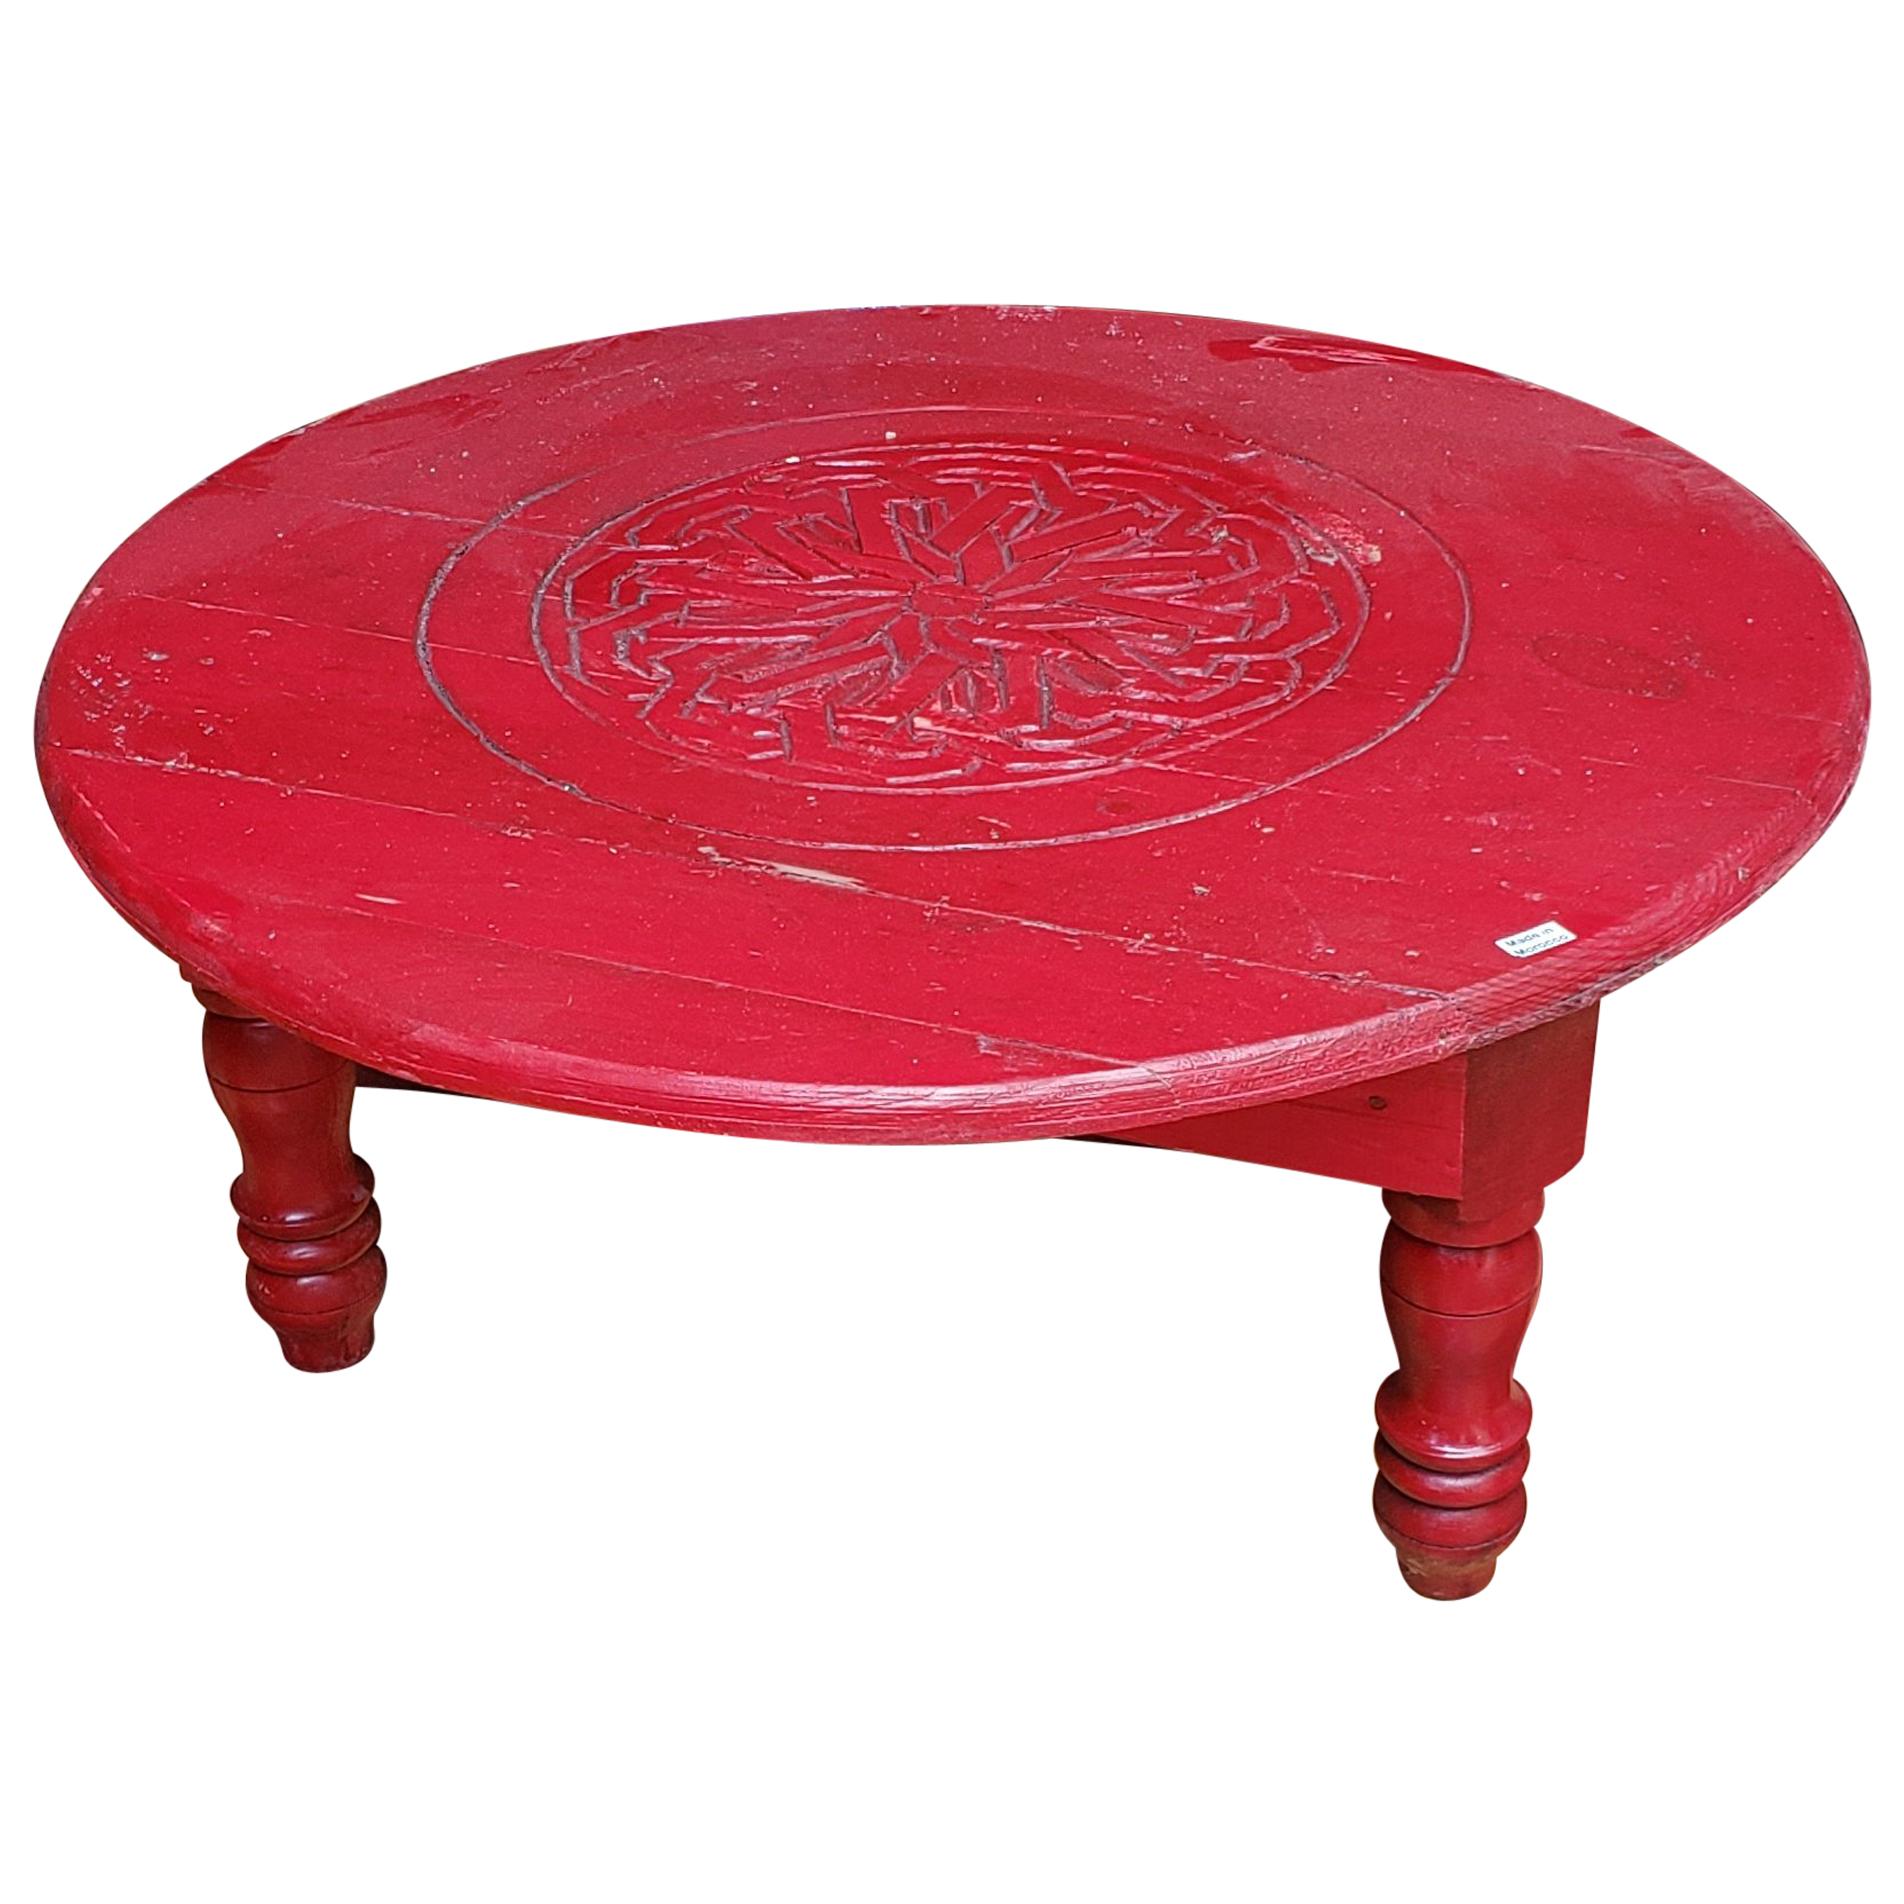 Moroccan Hand Carved Wooden Side Table, Red Round